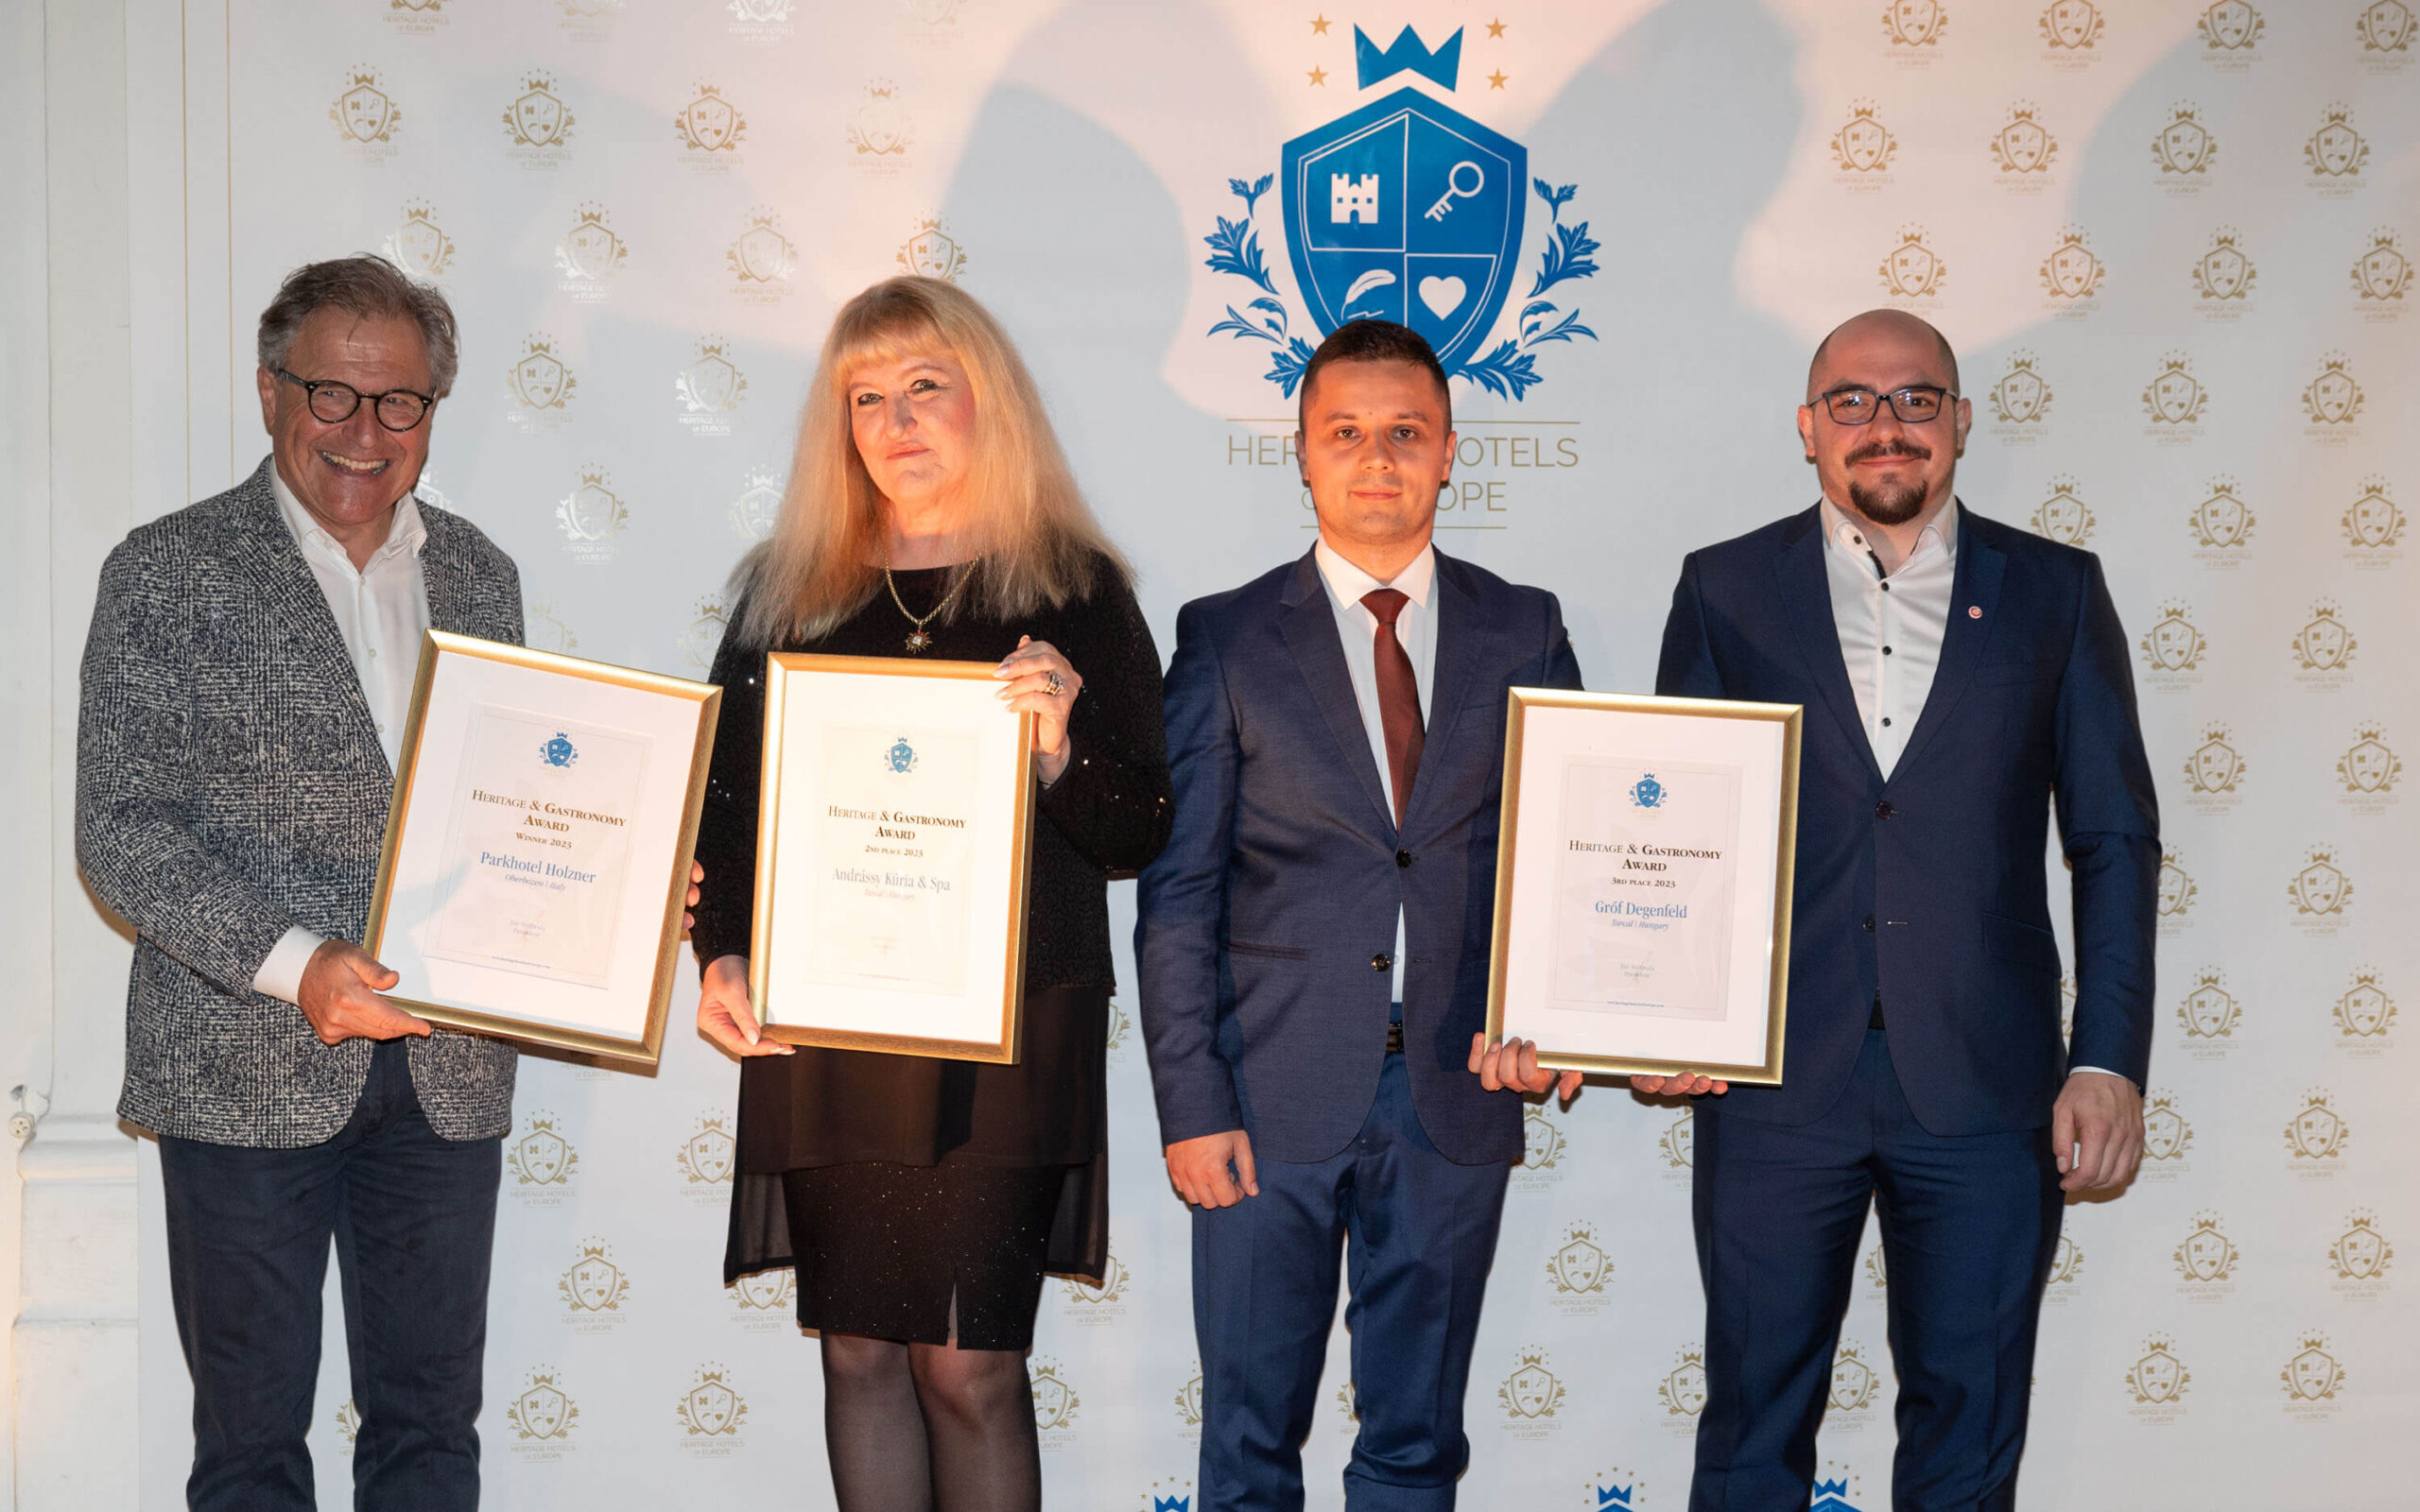 Heritage Hotels of Europe Awards Ceremony 2023 - winners in the category Heritage & Gastronomy